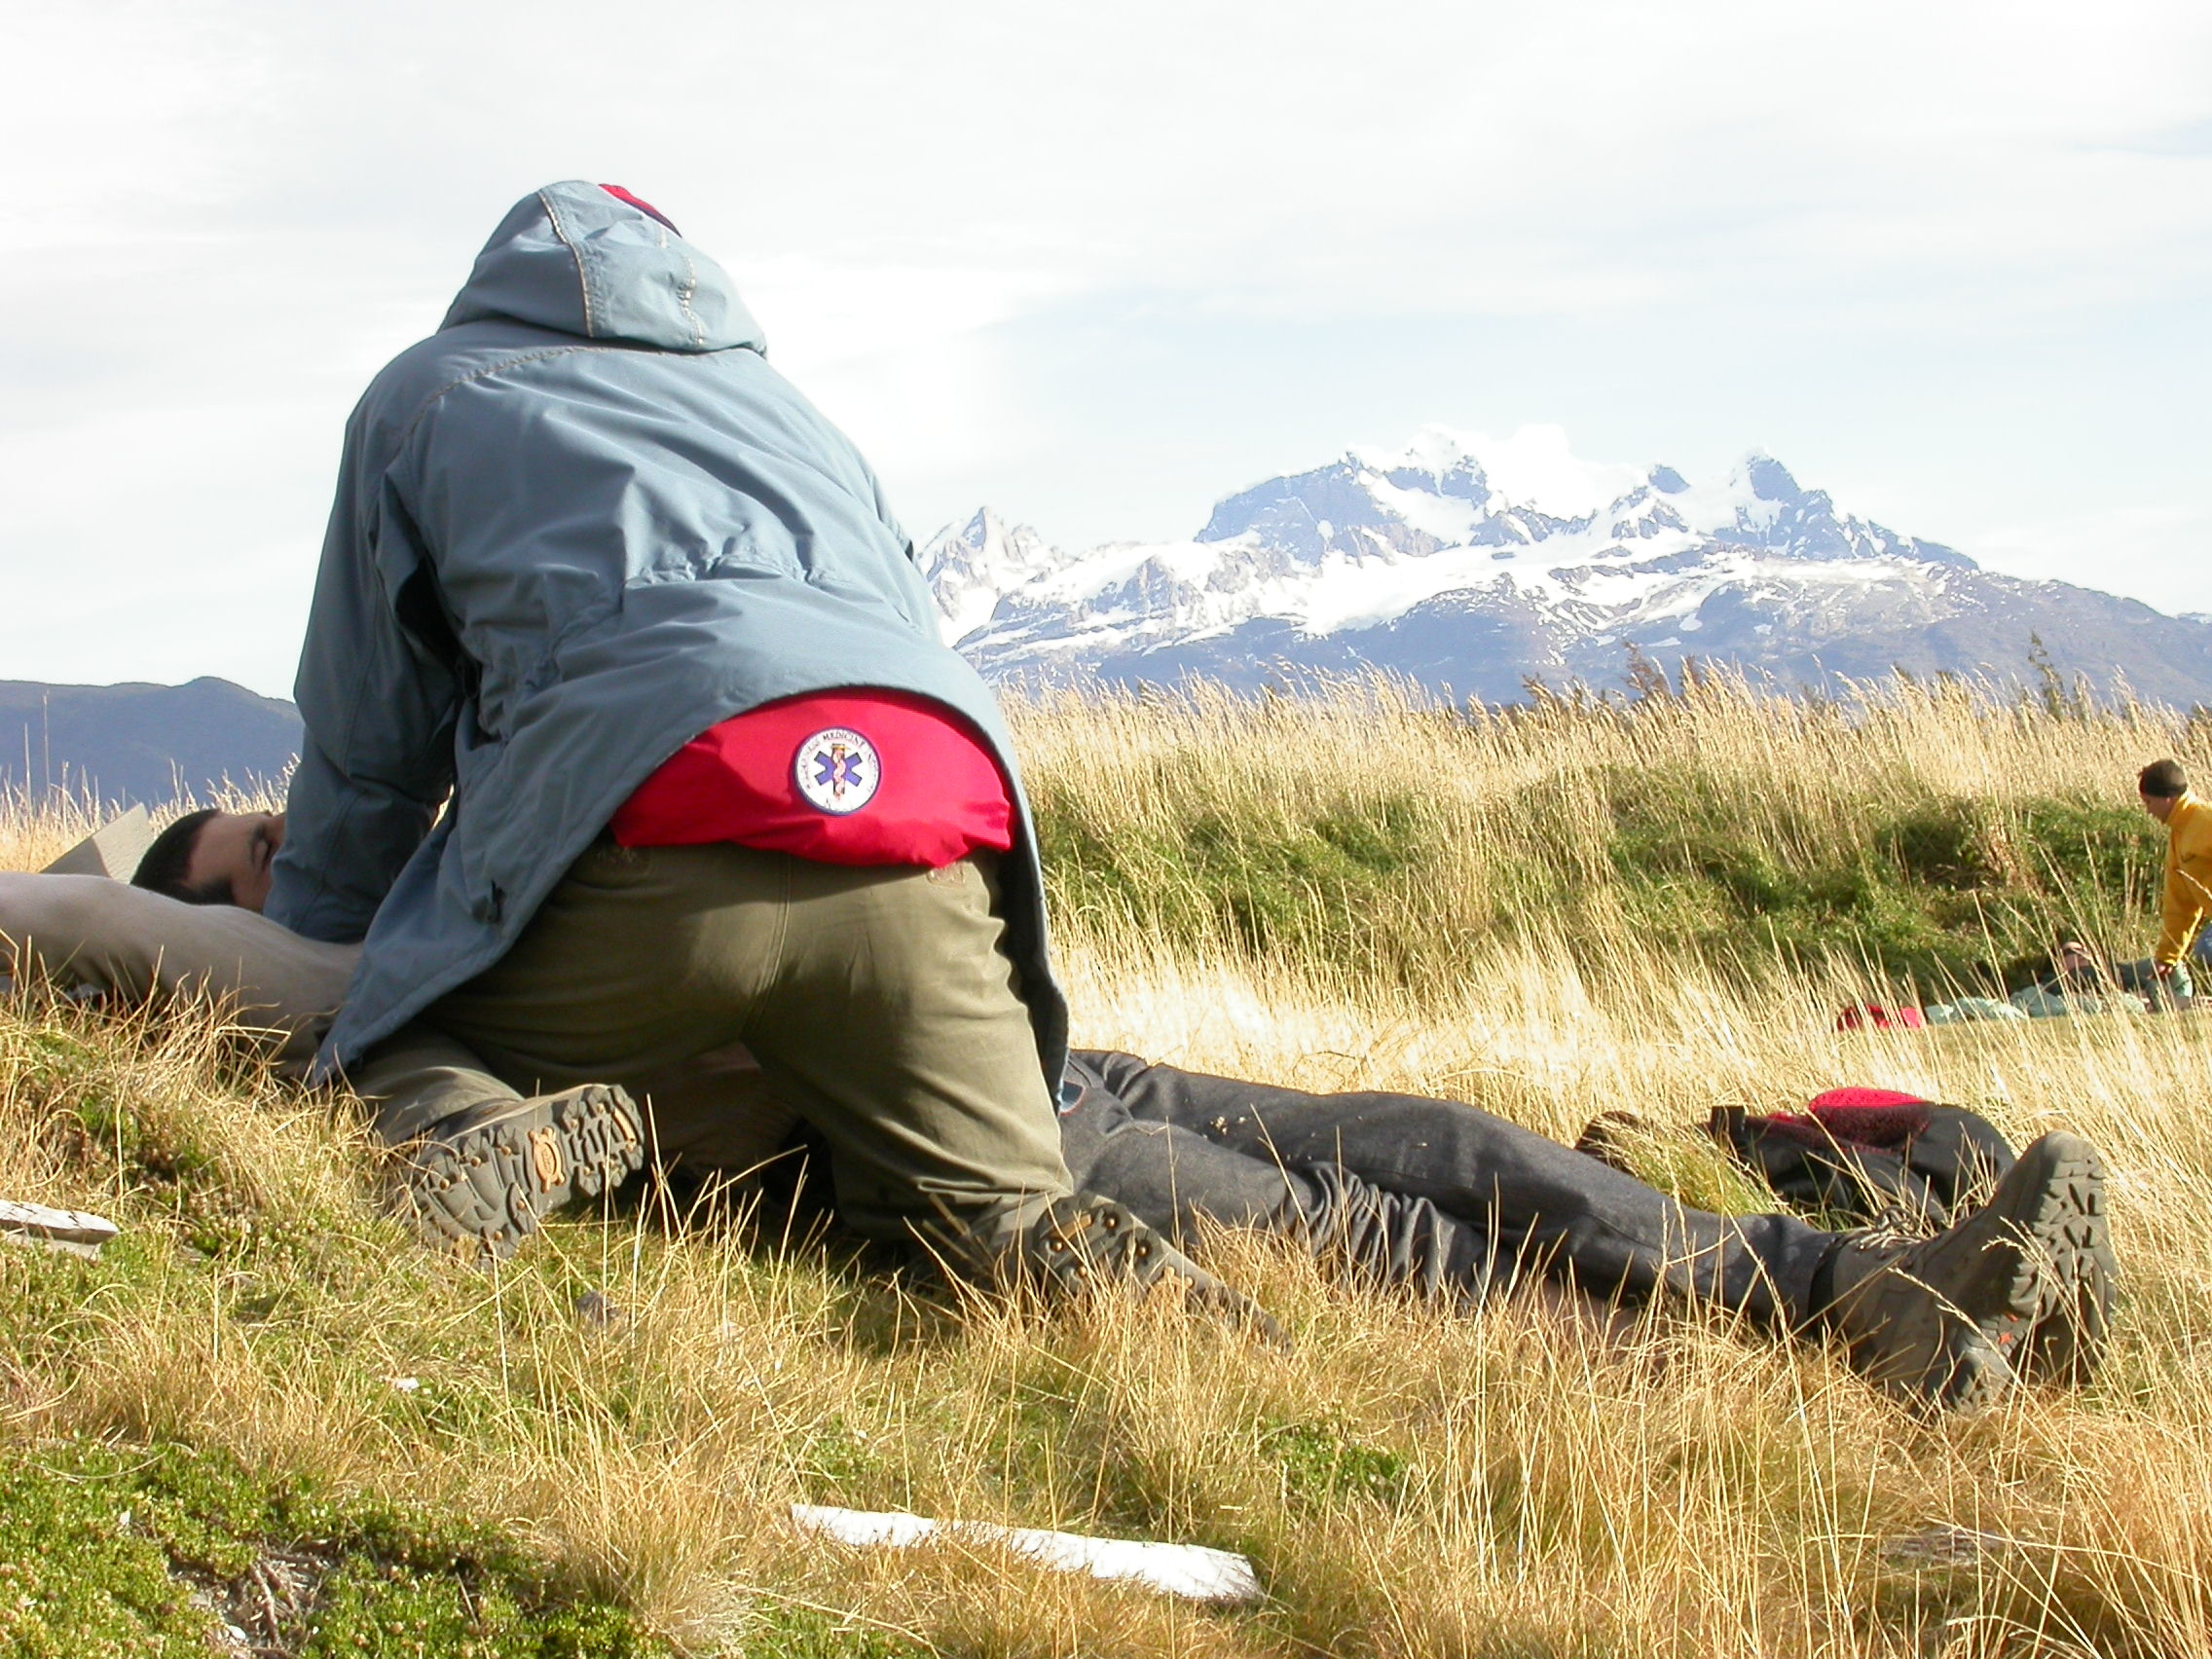 NOLS wilderness medicine student practices caring for a patient lying in the grass with a view of snow-capped mountains beyond